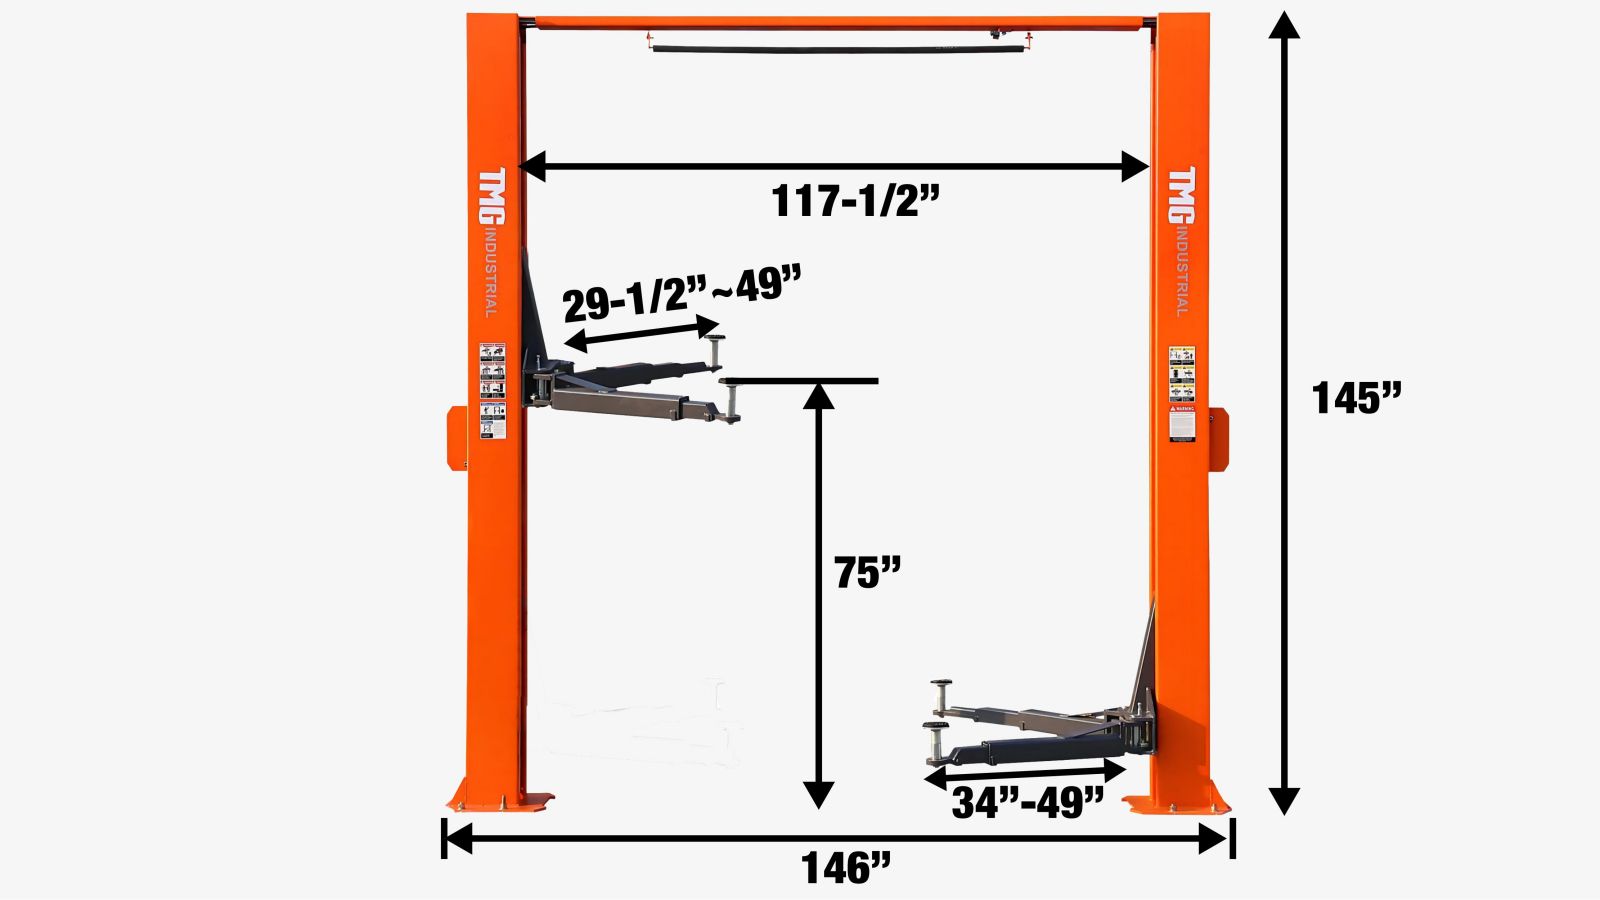 TMG Industrial 10,000-lb Two Post Overhead Auto Lift, Symmetric Arms, 72” Lift Height, Dual-Point Lock Release, TMG-ALT100-specifications-image